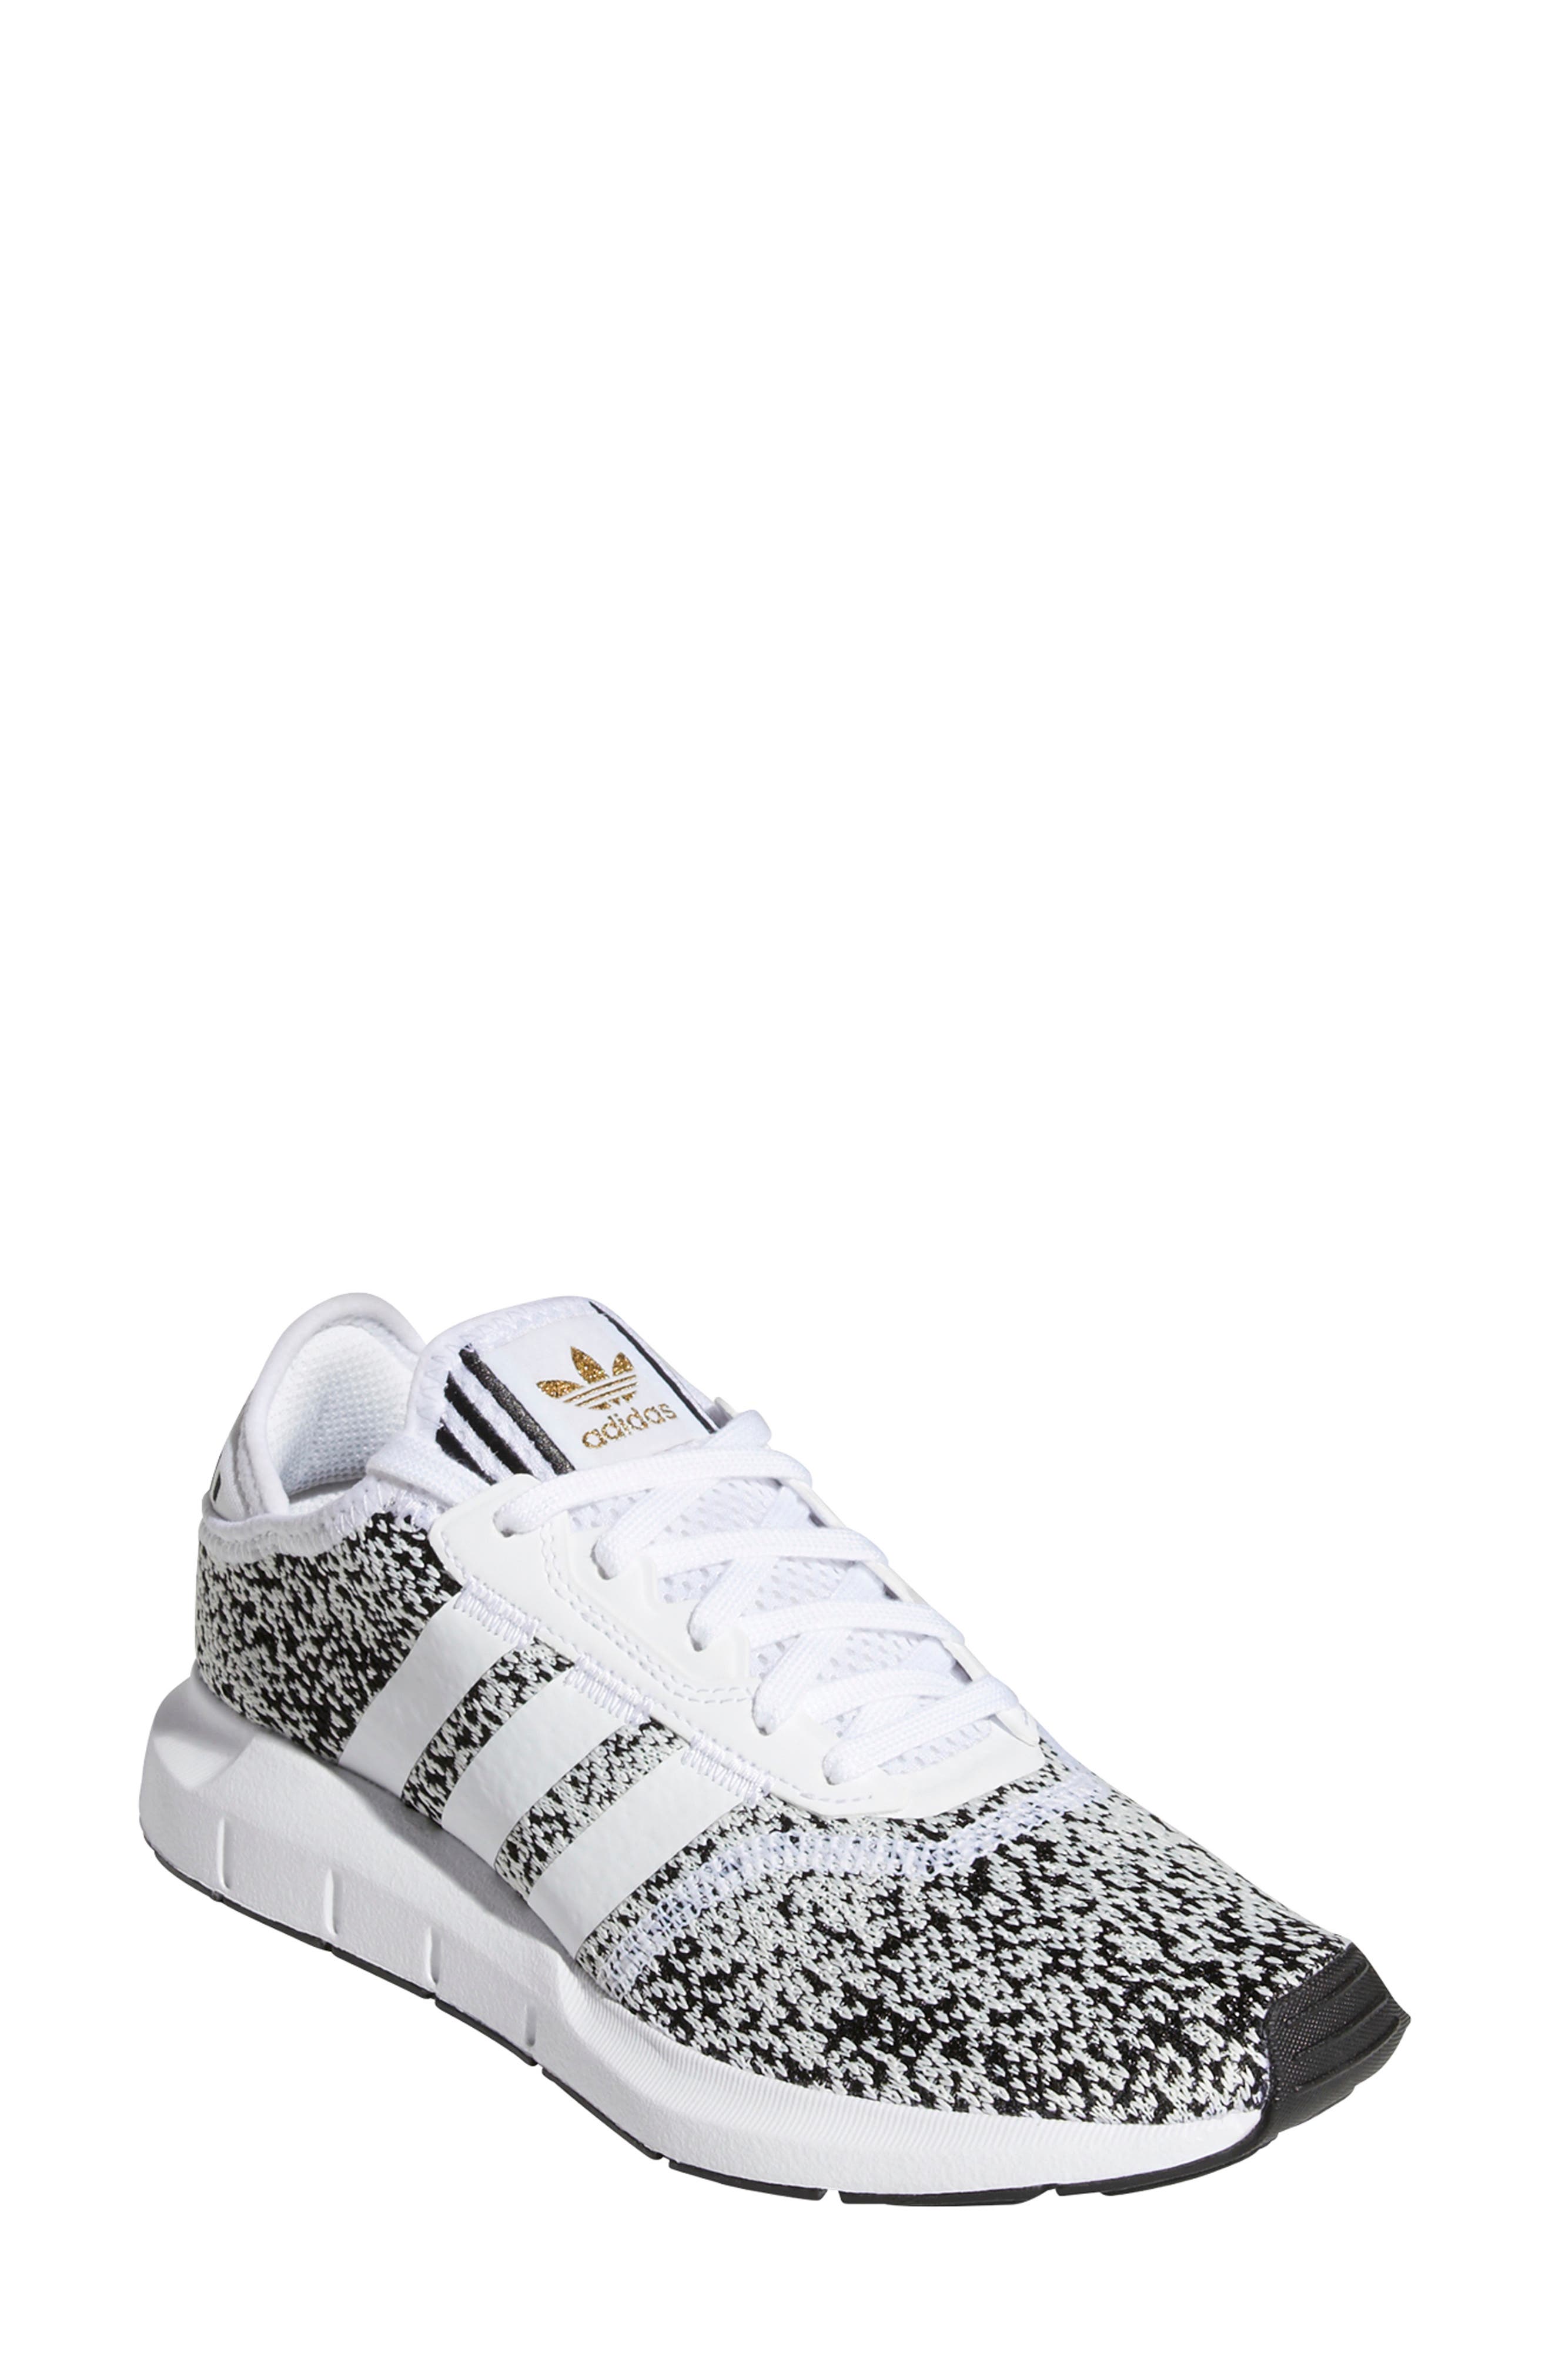 adidas white shoes with grey stripes